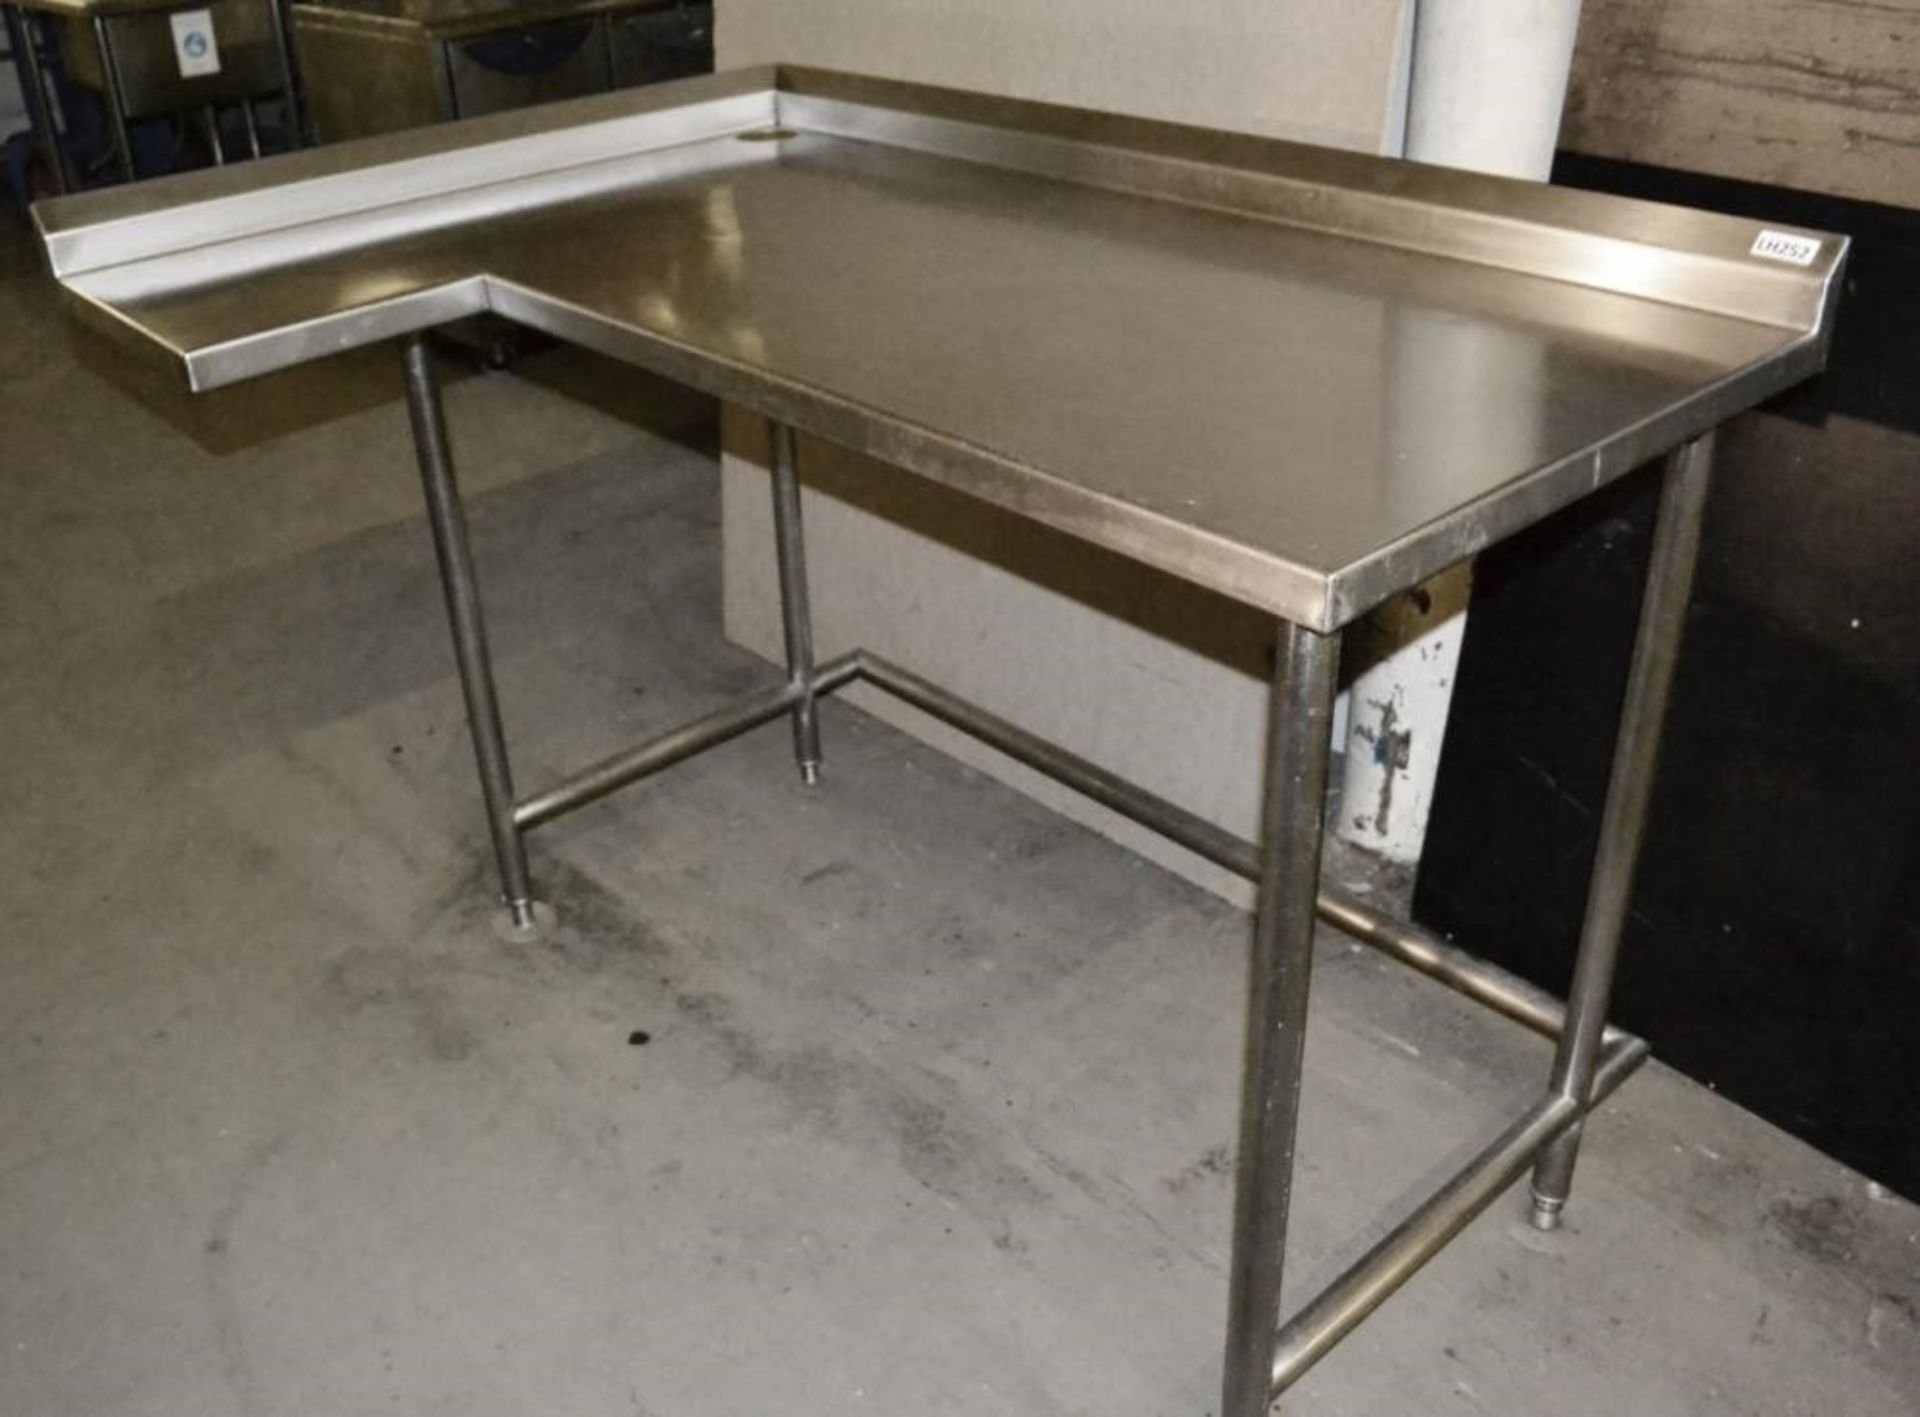 1 x Stainless Steel Commercial Corner Prep Counter With Spashback - Dimensions: W142 x D98 x H102cm - Image 3 of 4